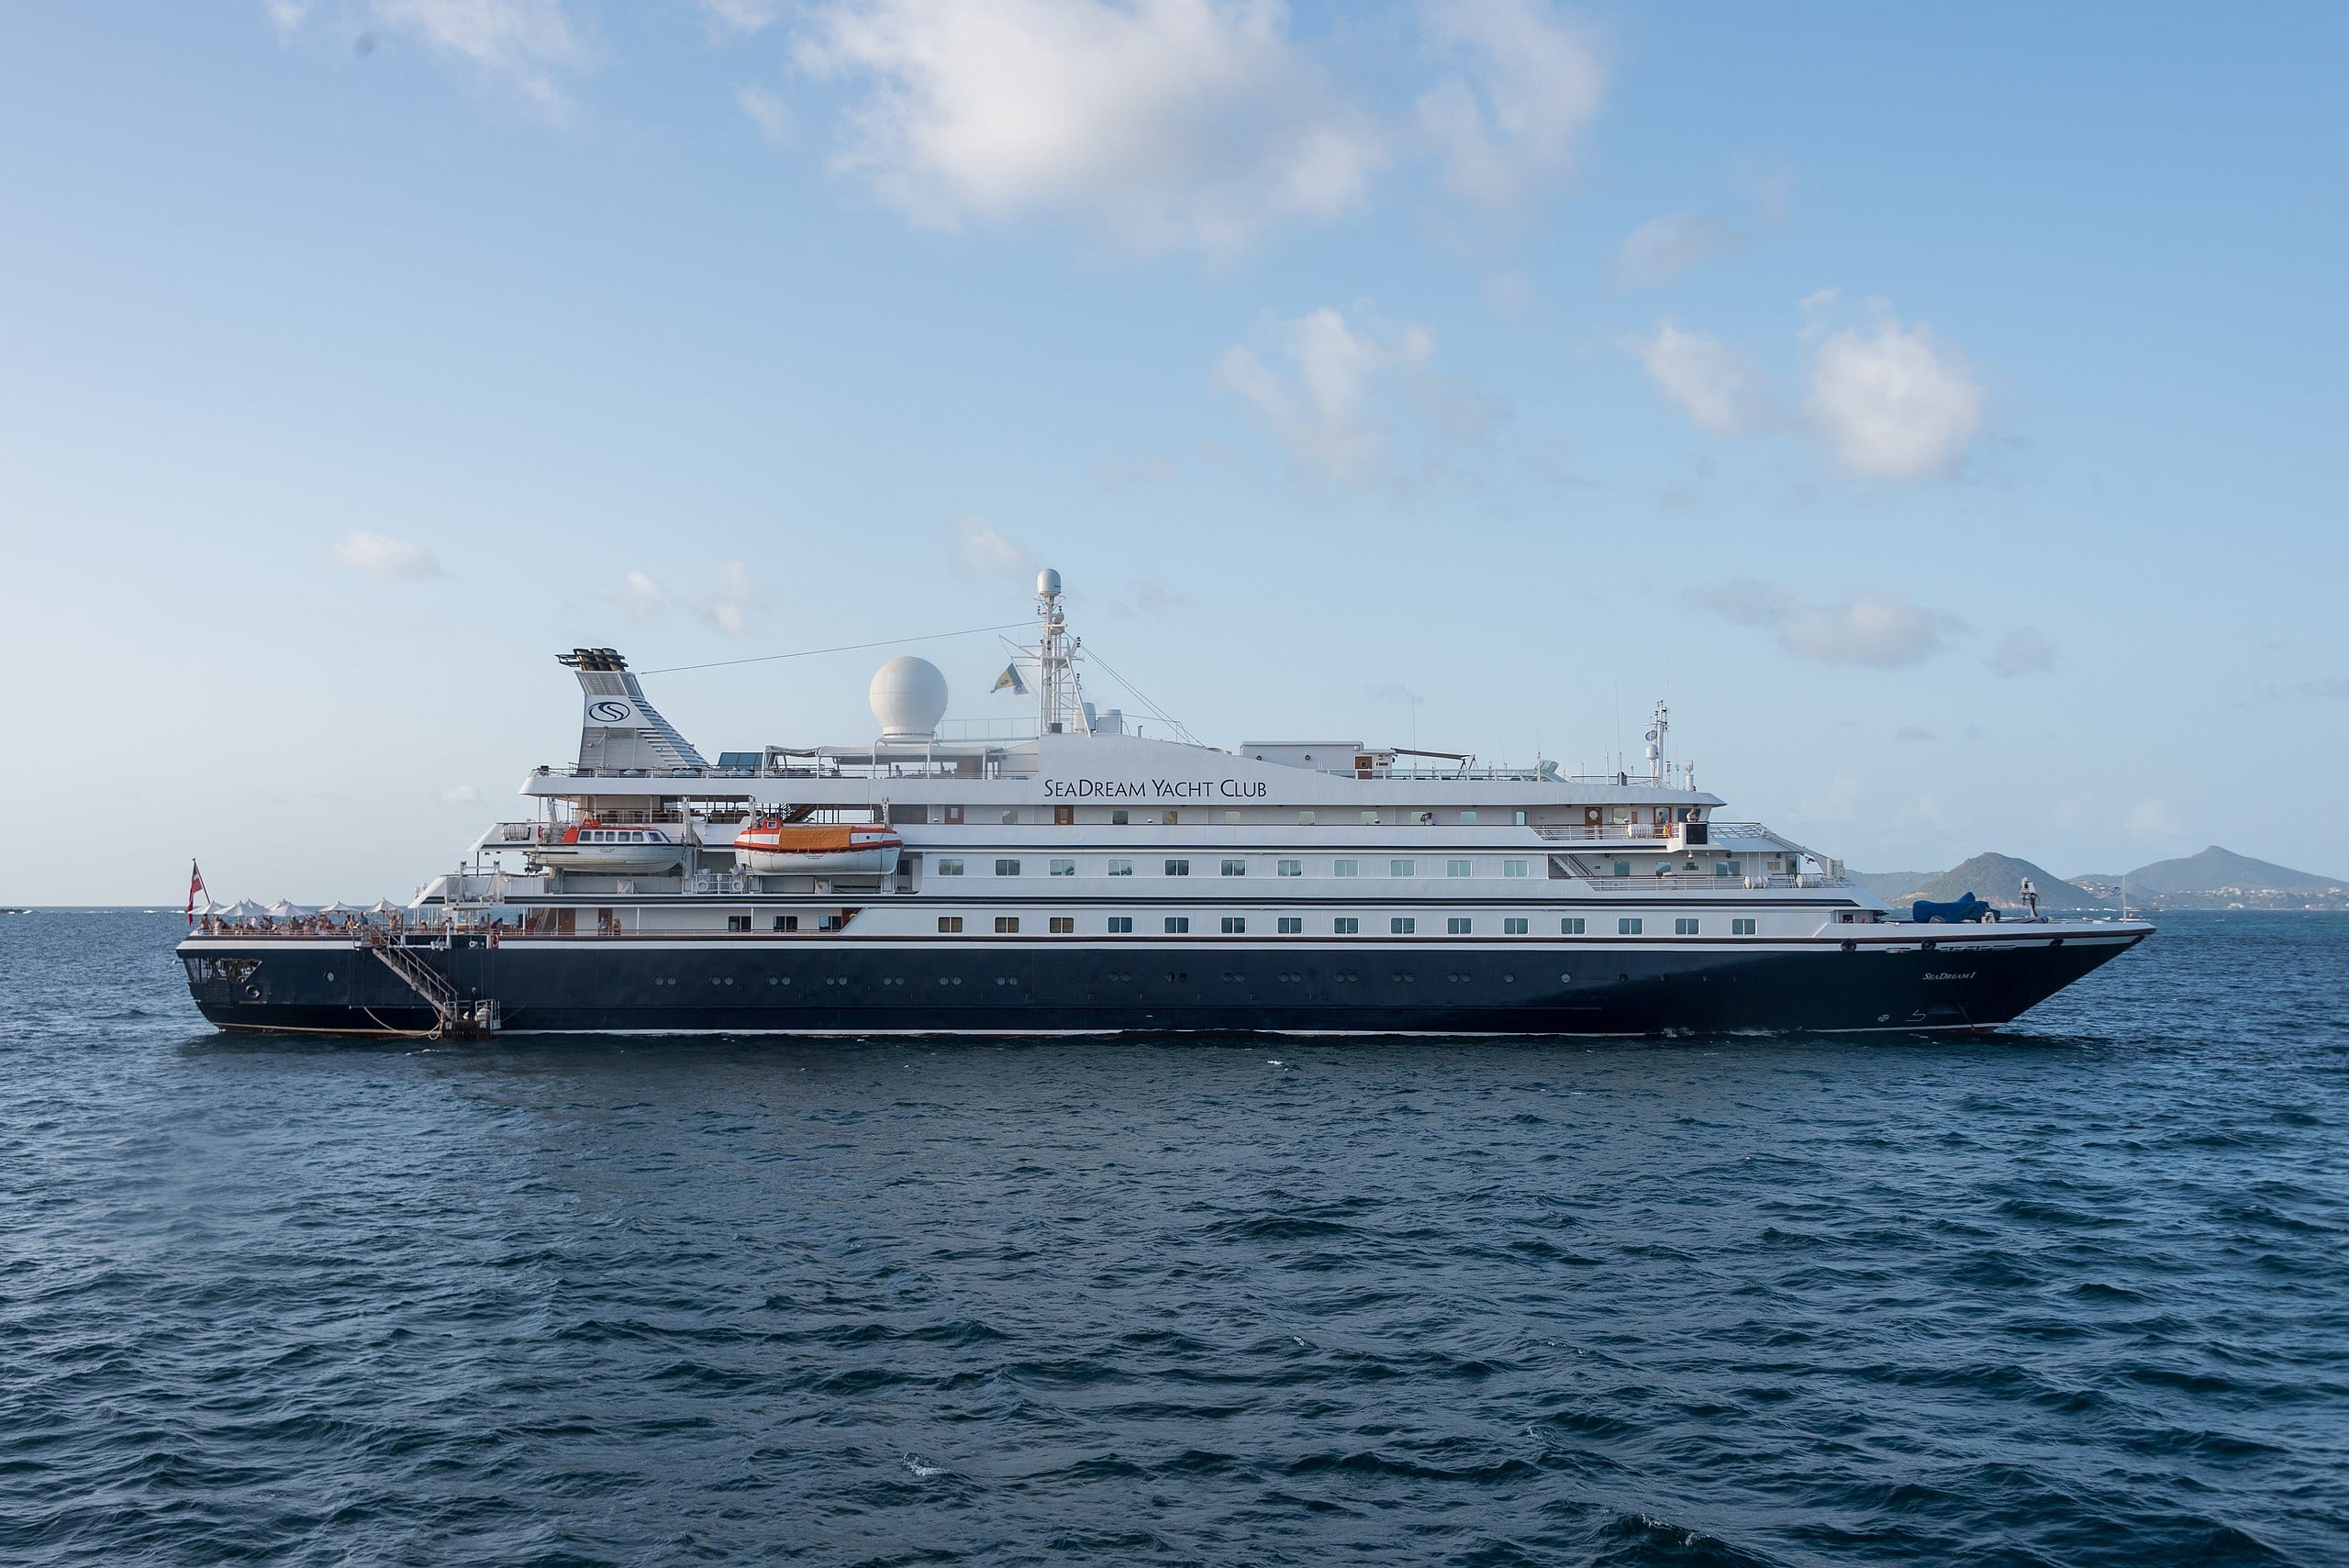 SeaDream halts Caribbean cruise as passengers test positive for COVID-19